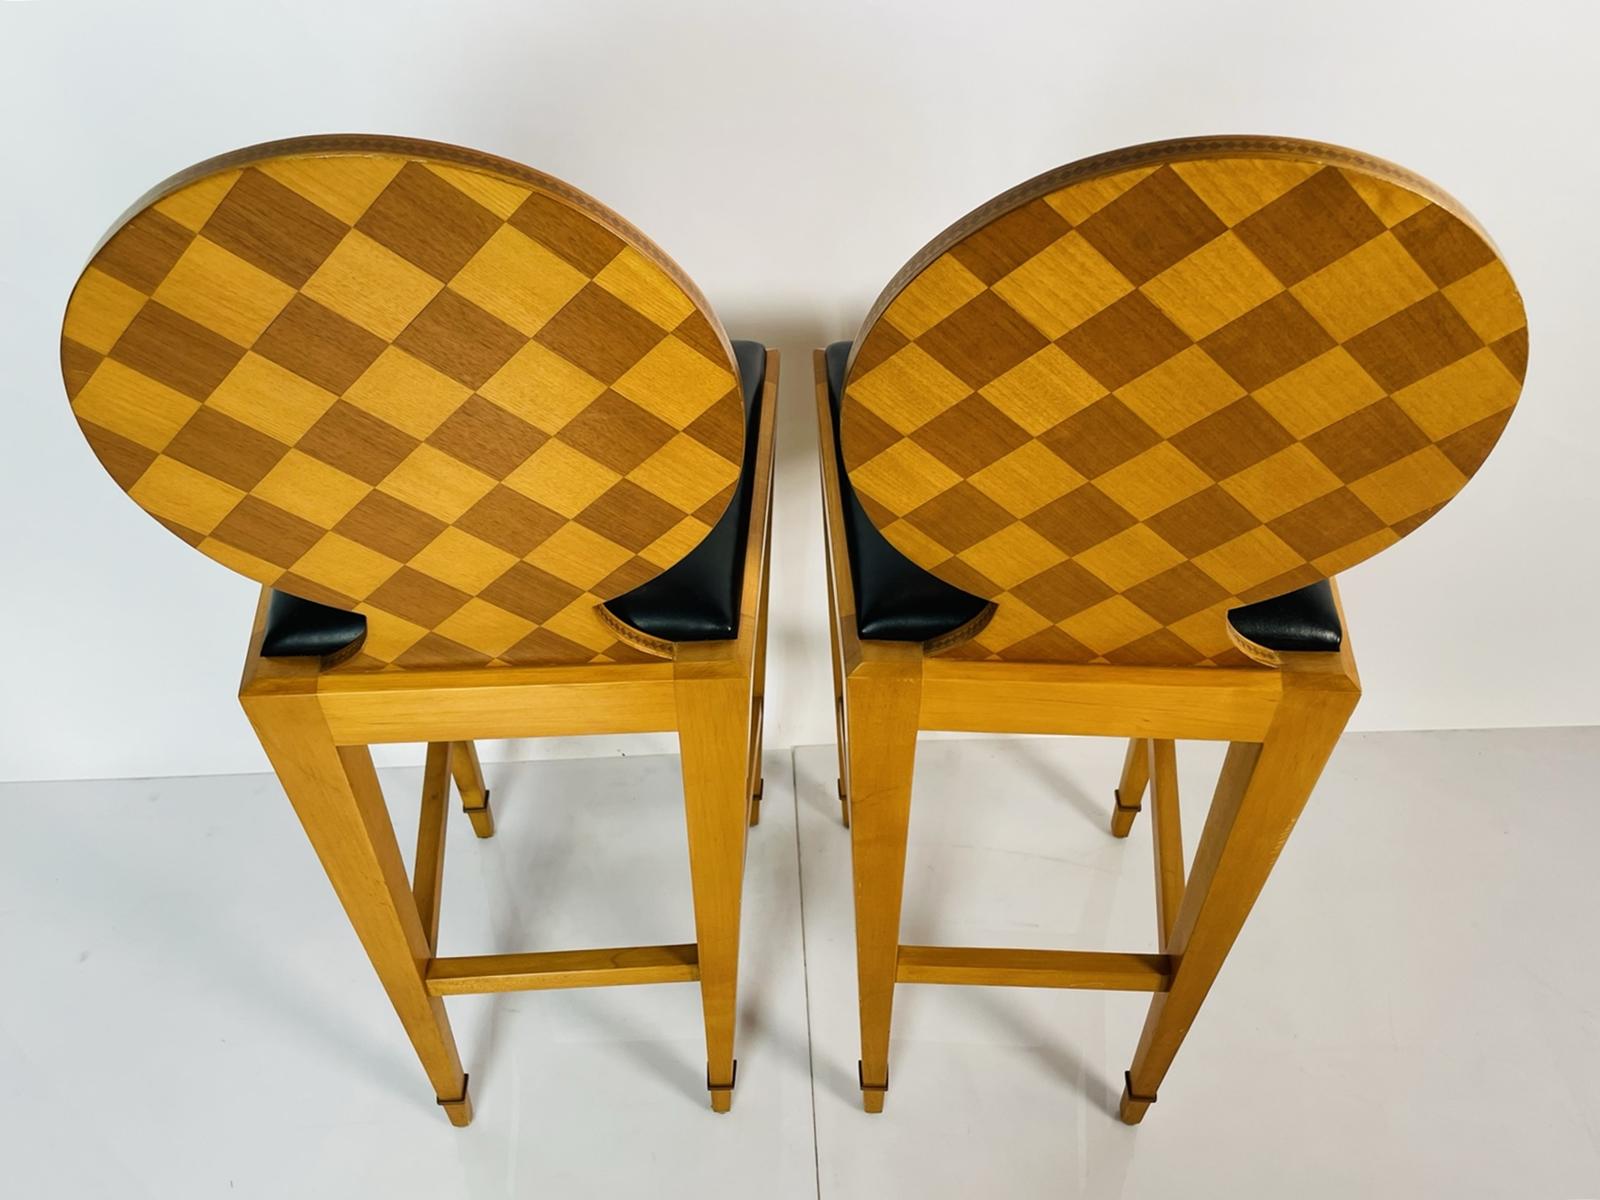 Textile Pair of Paris Hall Harlequin Bar Stools by John Hutton for Donghia